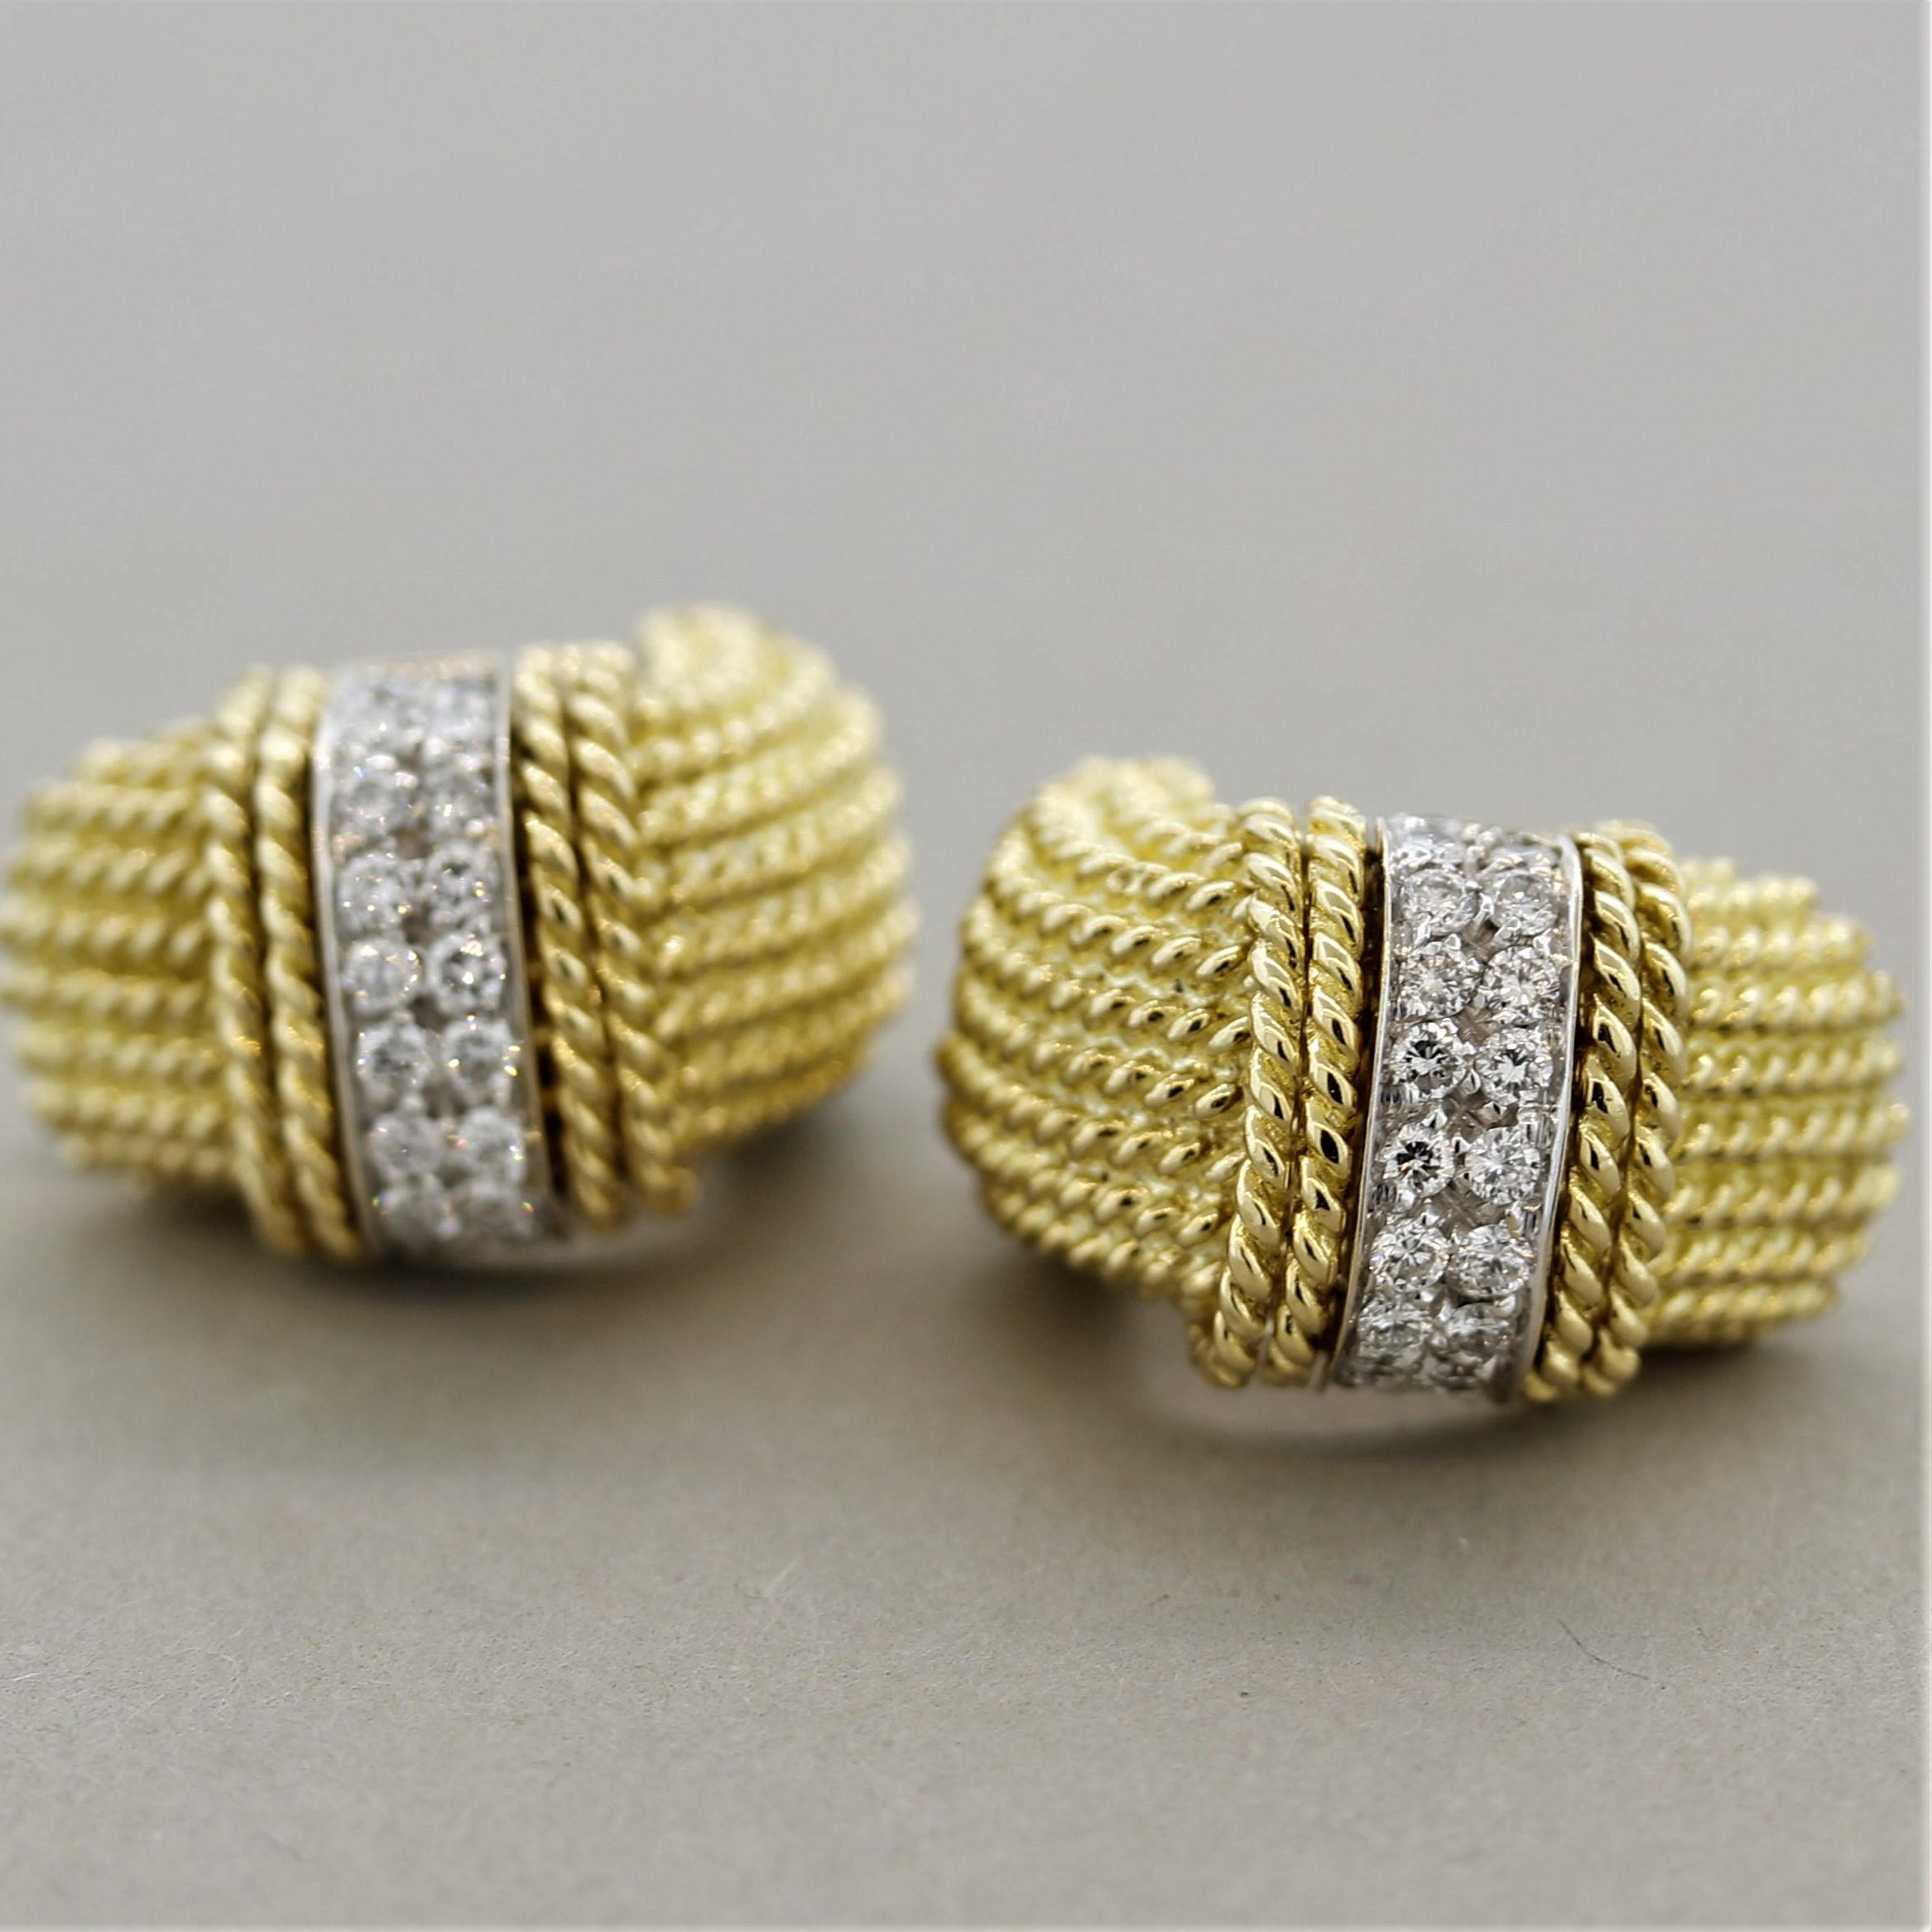 A stylish pair of diamond earrings made in Italy. They feature 0.40 carats of round brilliant cut diamonds set in rows of two. On the back of each earring is a single round cut ruby adding a special touch to the piece. Made in 18k yellow gold with